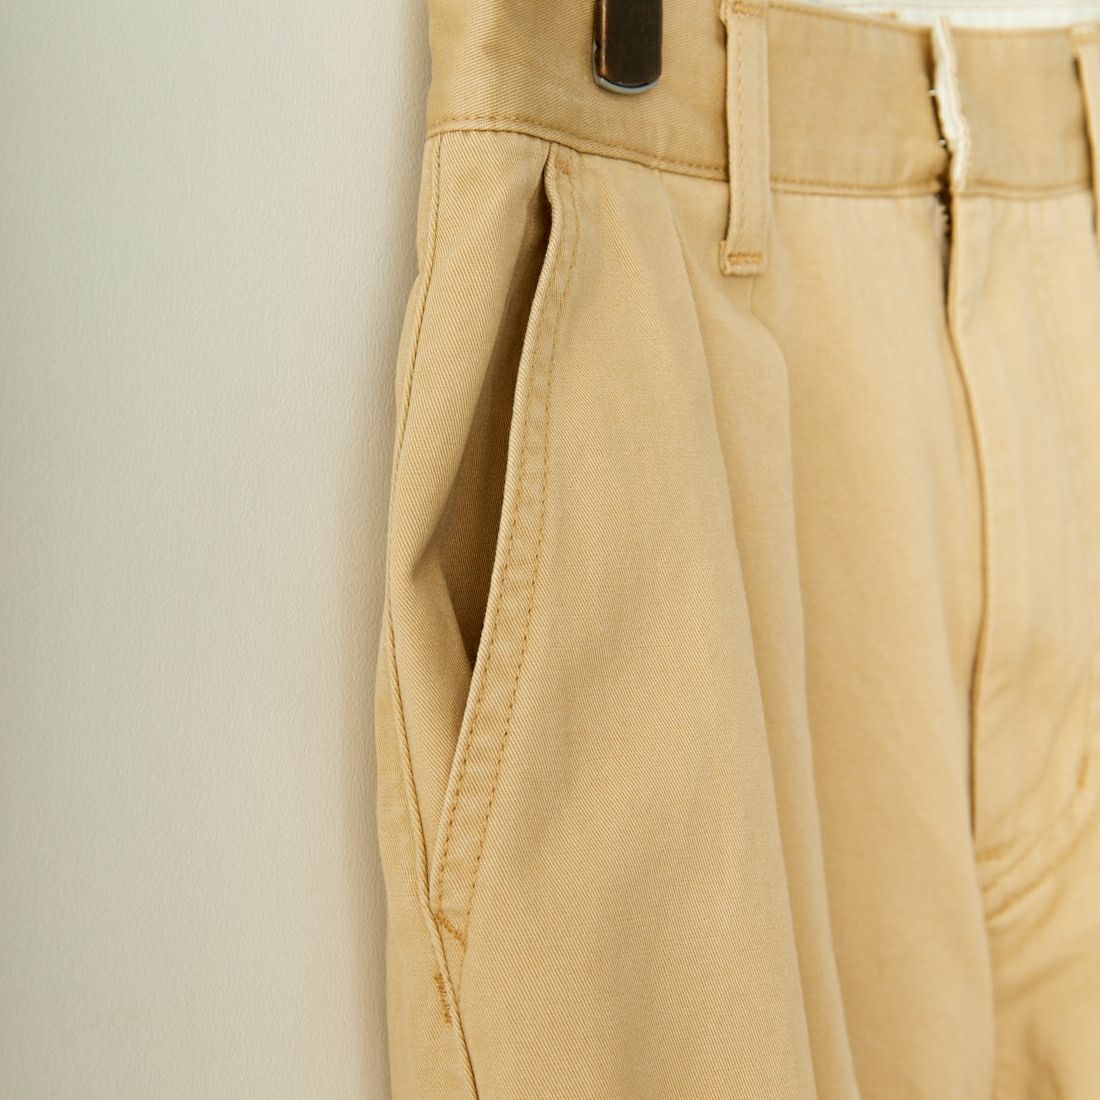 Jeans Factory Clothes [ジーンズファクトリークローズ] タックトラウザー [IN7-PT-4] BEIGE